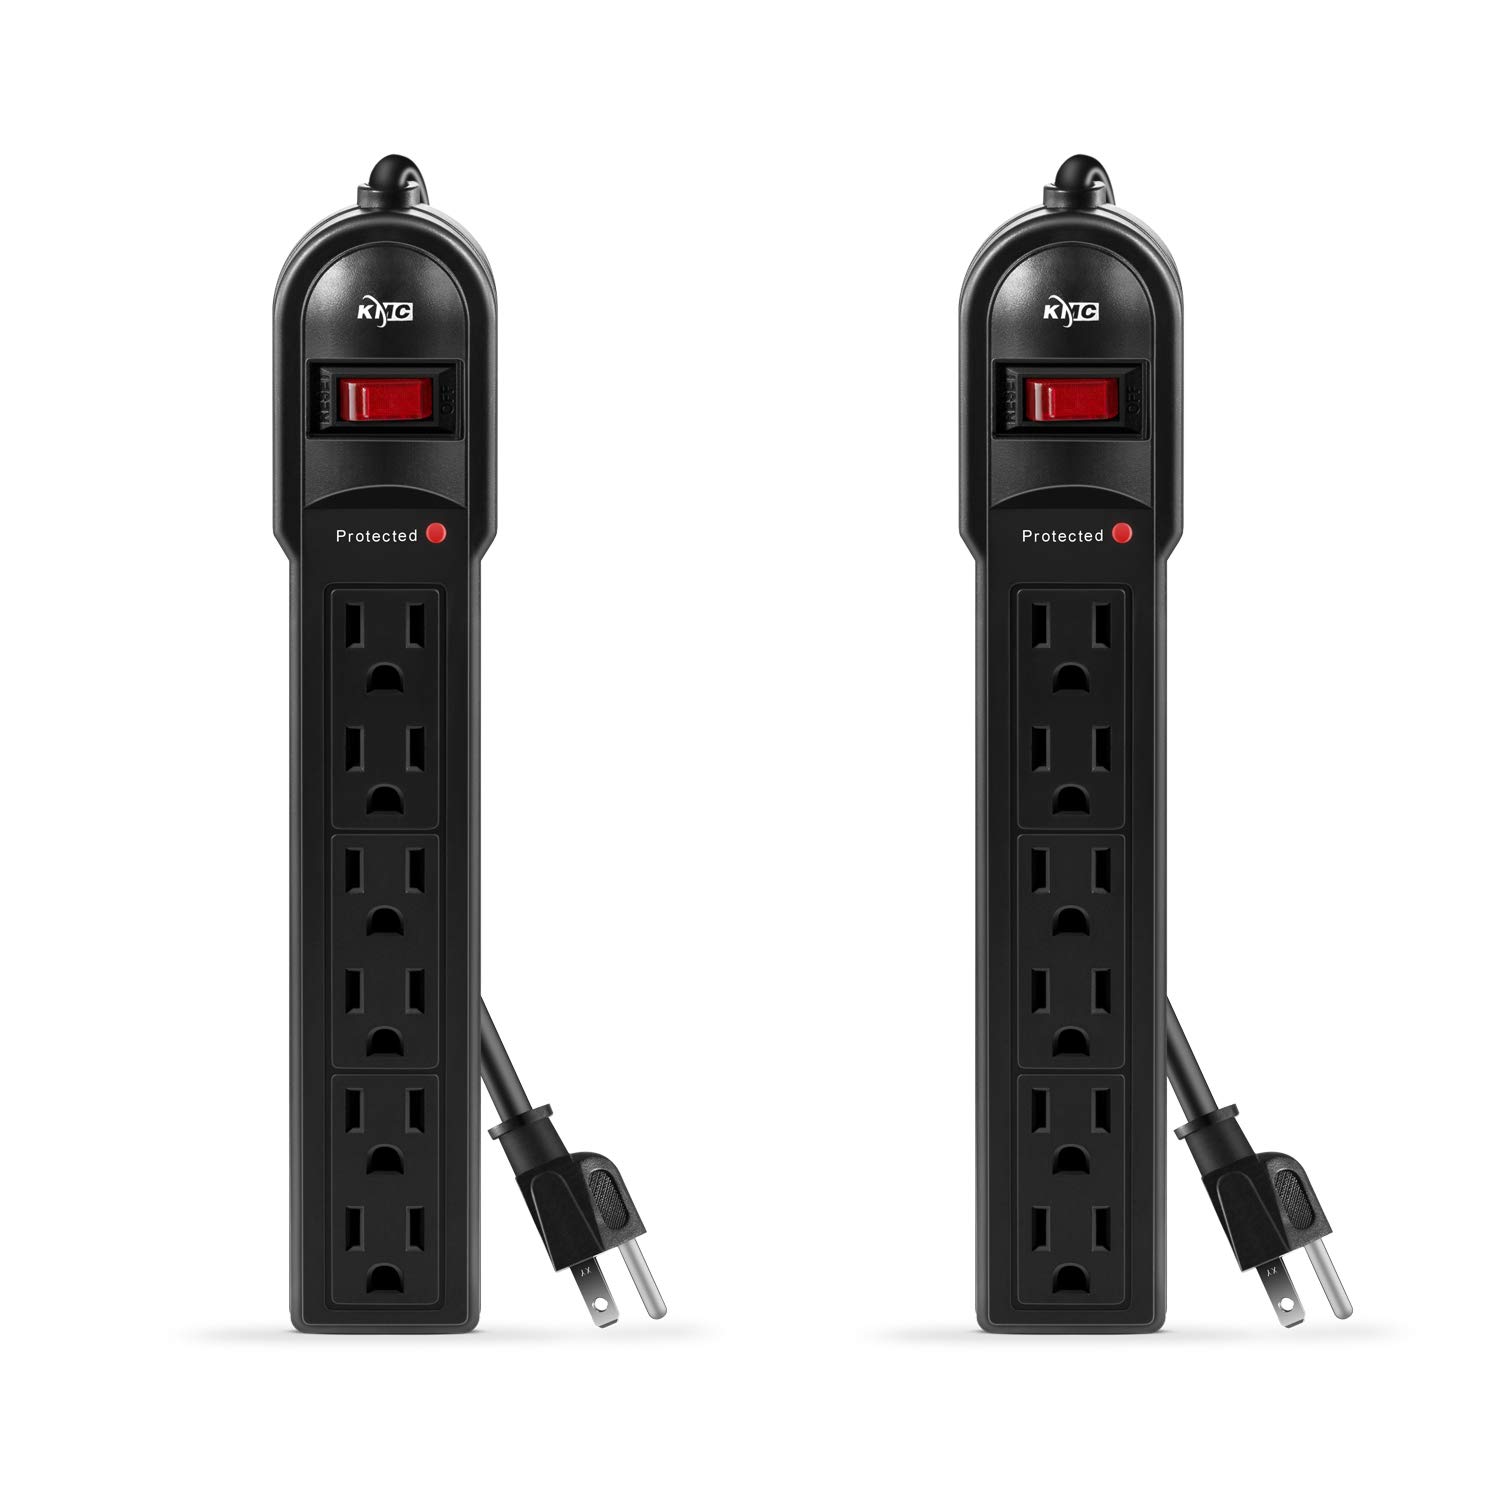 2-Pack KMC Outlet Surge Protector Power Strip 600 Joule, Overload Protection, 2-Foot Cord $5.49 + Free Shipping w/ Prime or on $35+